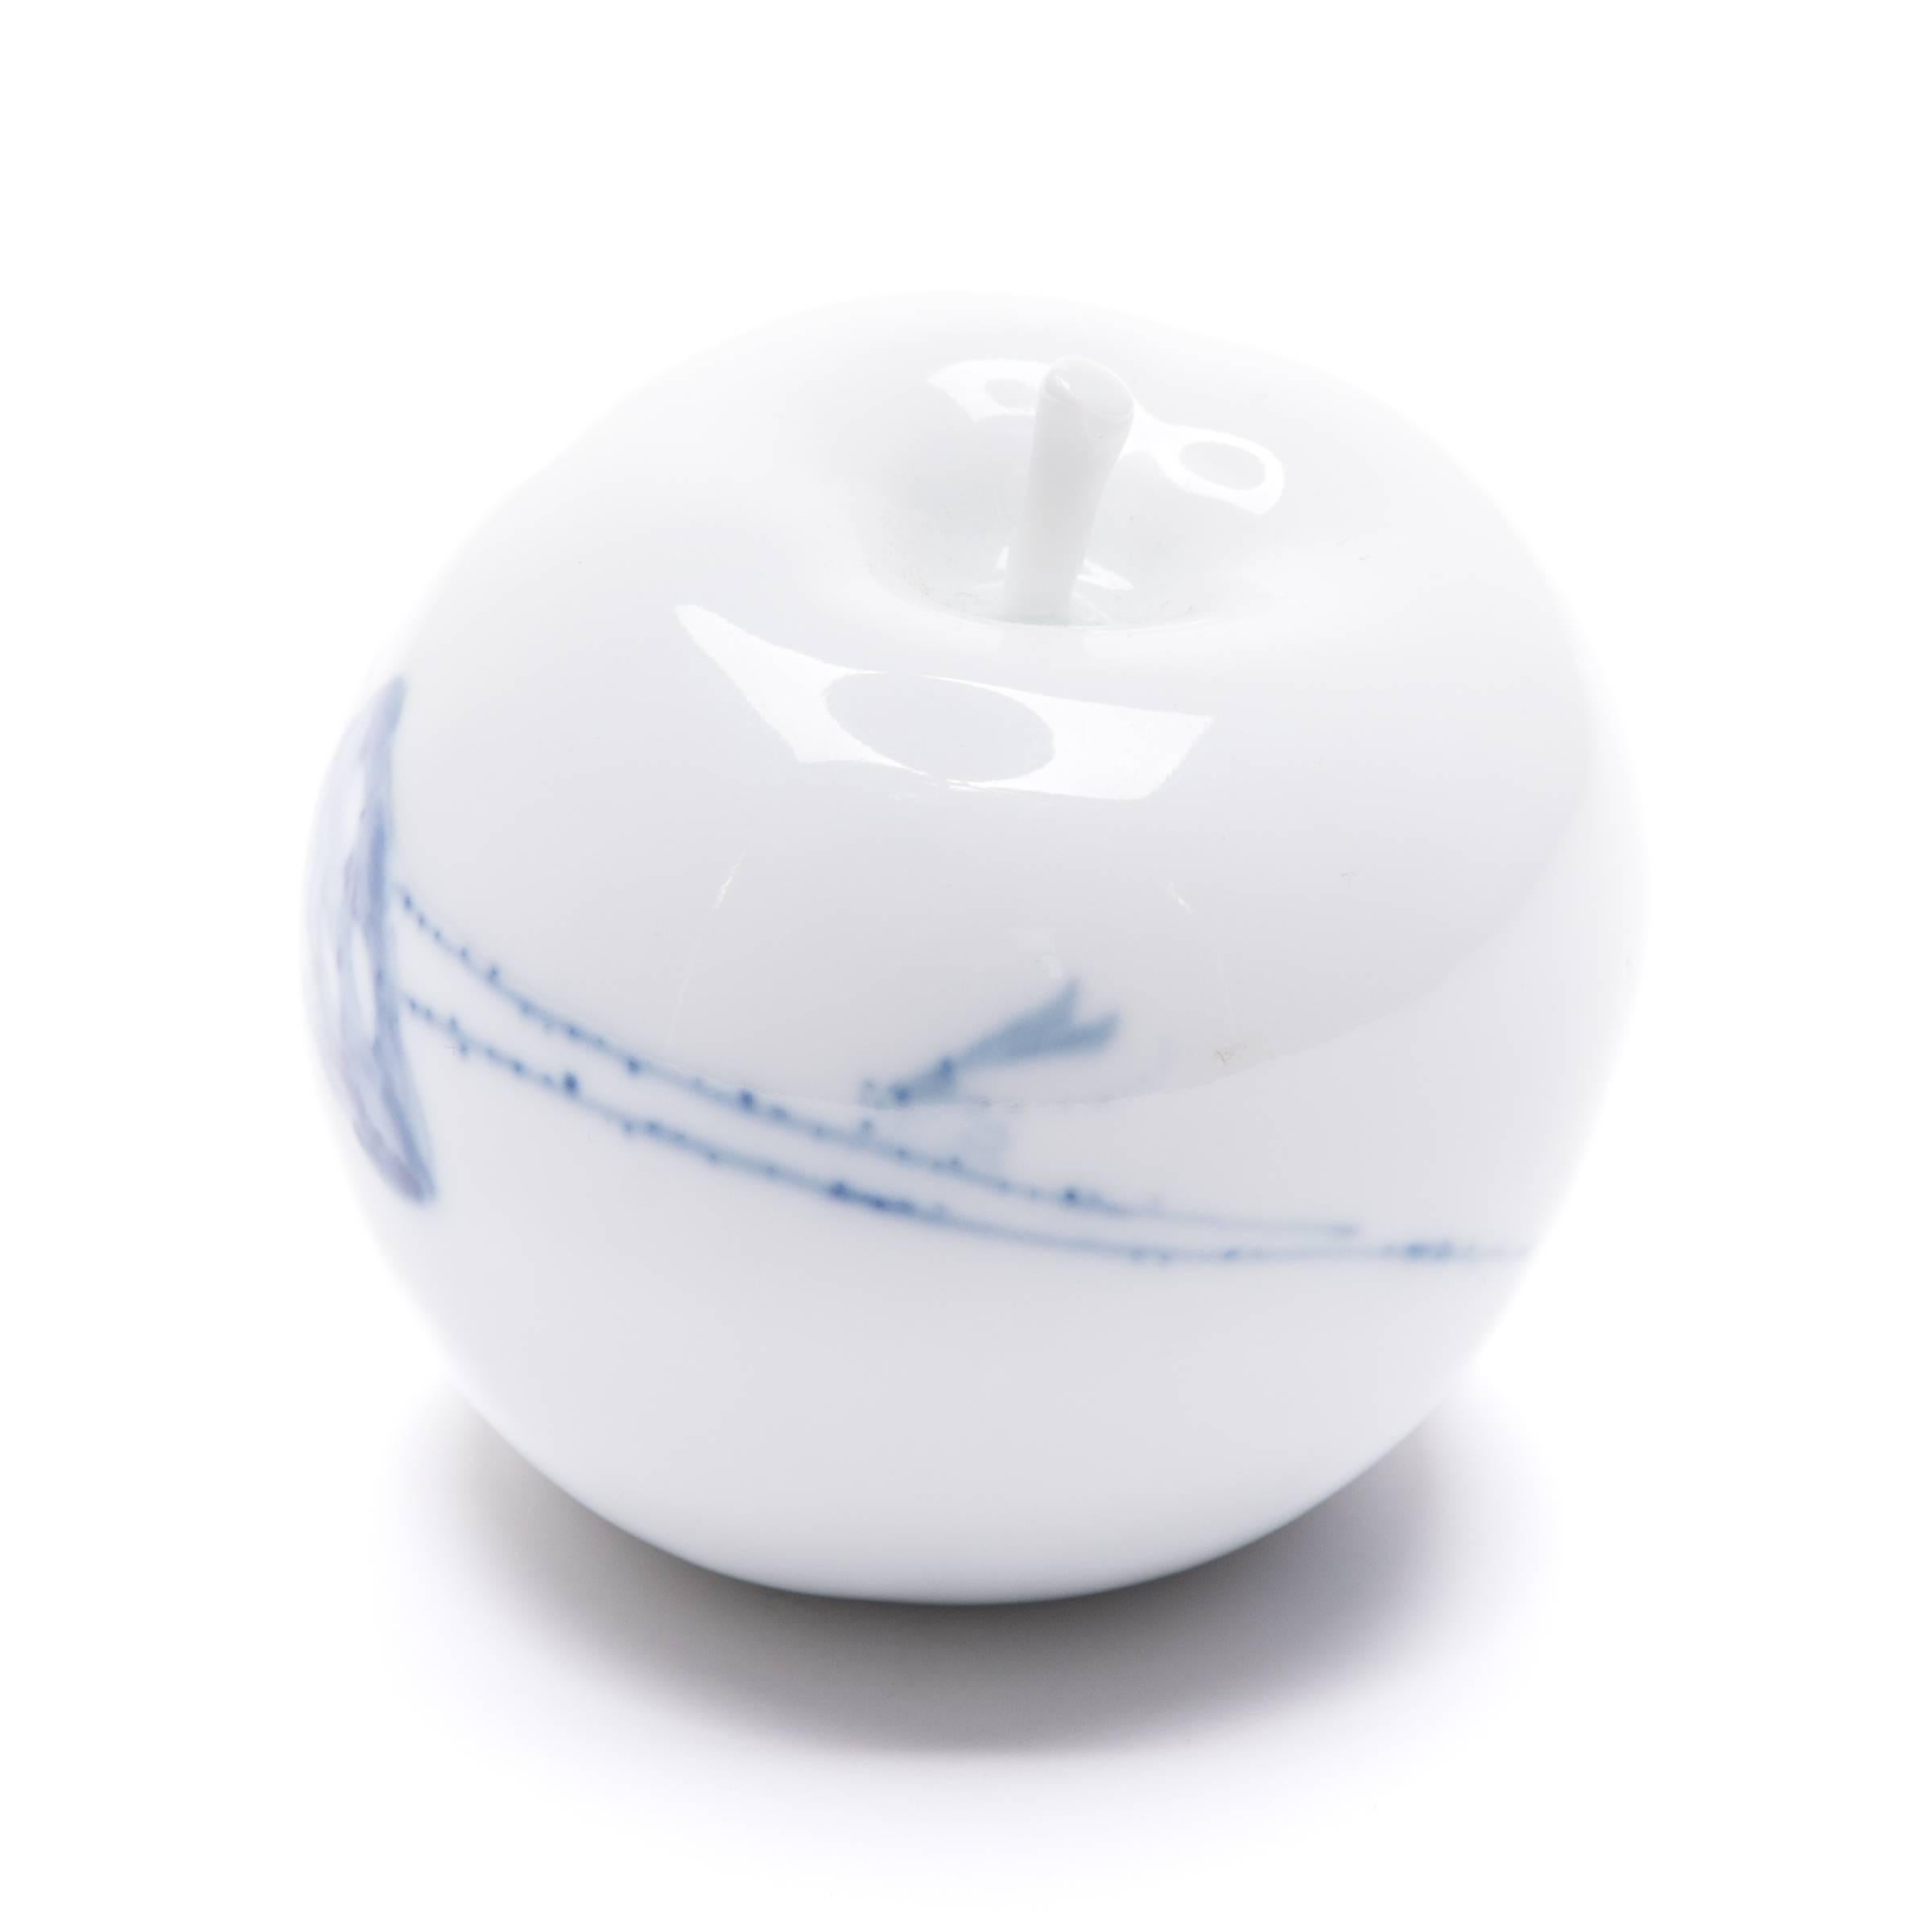 Created by artist Taikkun Li exclusively for PAGODA RED, this limited edition hand-painted porcelain apple is one of a series drawing on the rich tradition of Chinese blue-and-white ceramics. Fired at the historic Chinese imperial kilns of